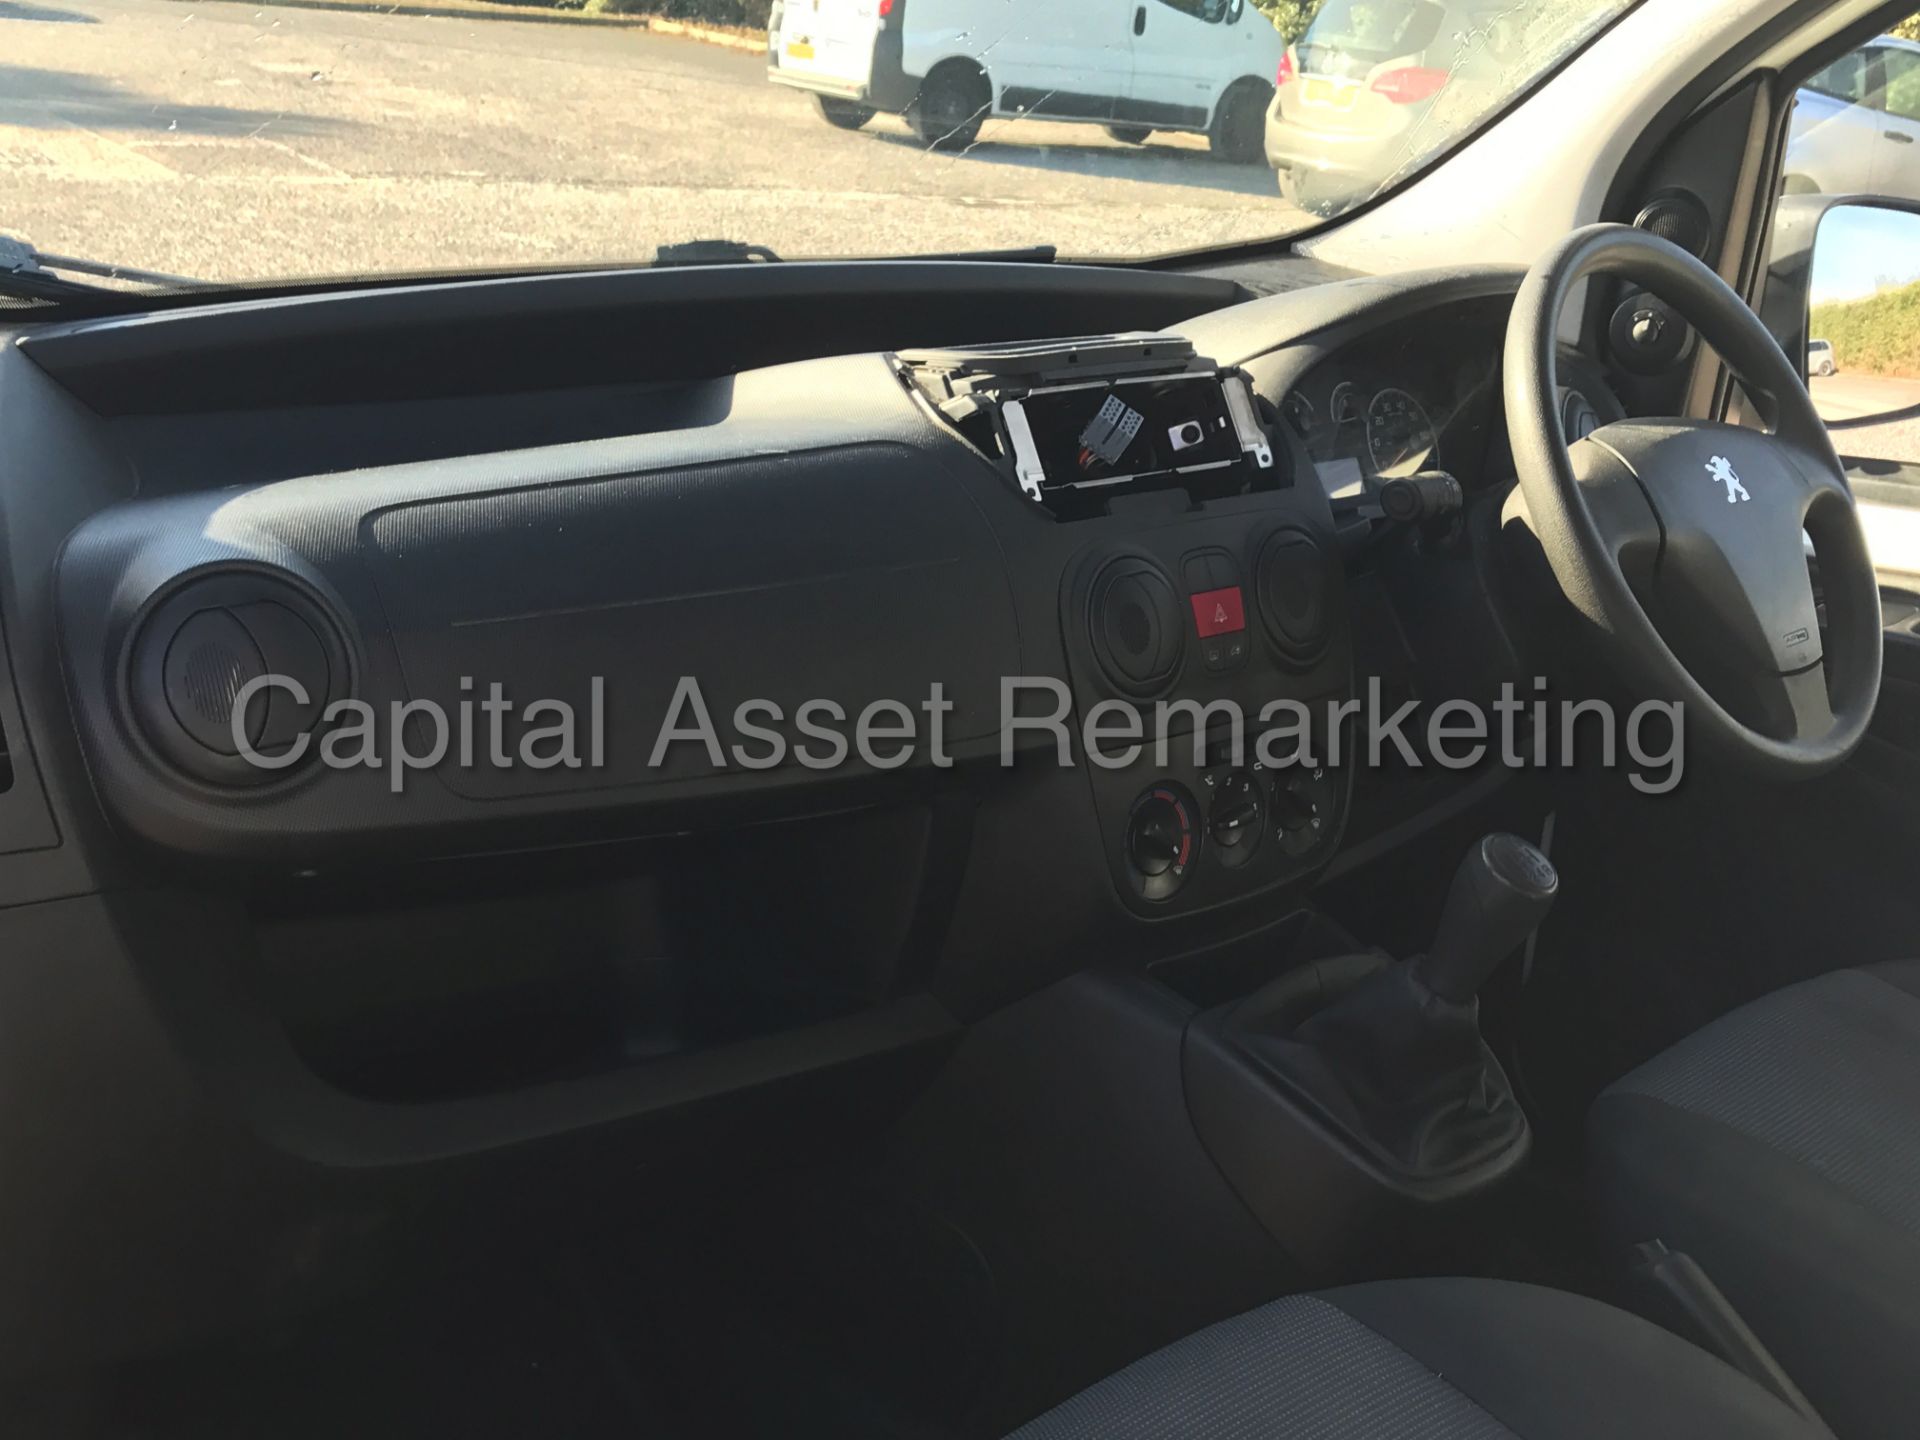 PEUGEOT BIPPER S (2014 MODEL) '1.2 HDI - DIESEL - ELEC PACK' (1 OWNER FROM NEW - FULL HISTORY) - Image 13 of 19